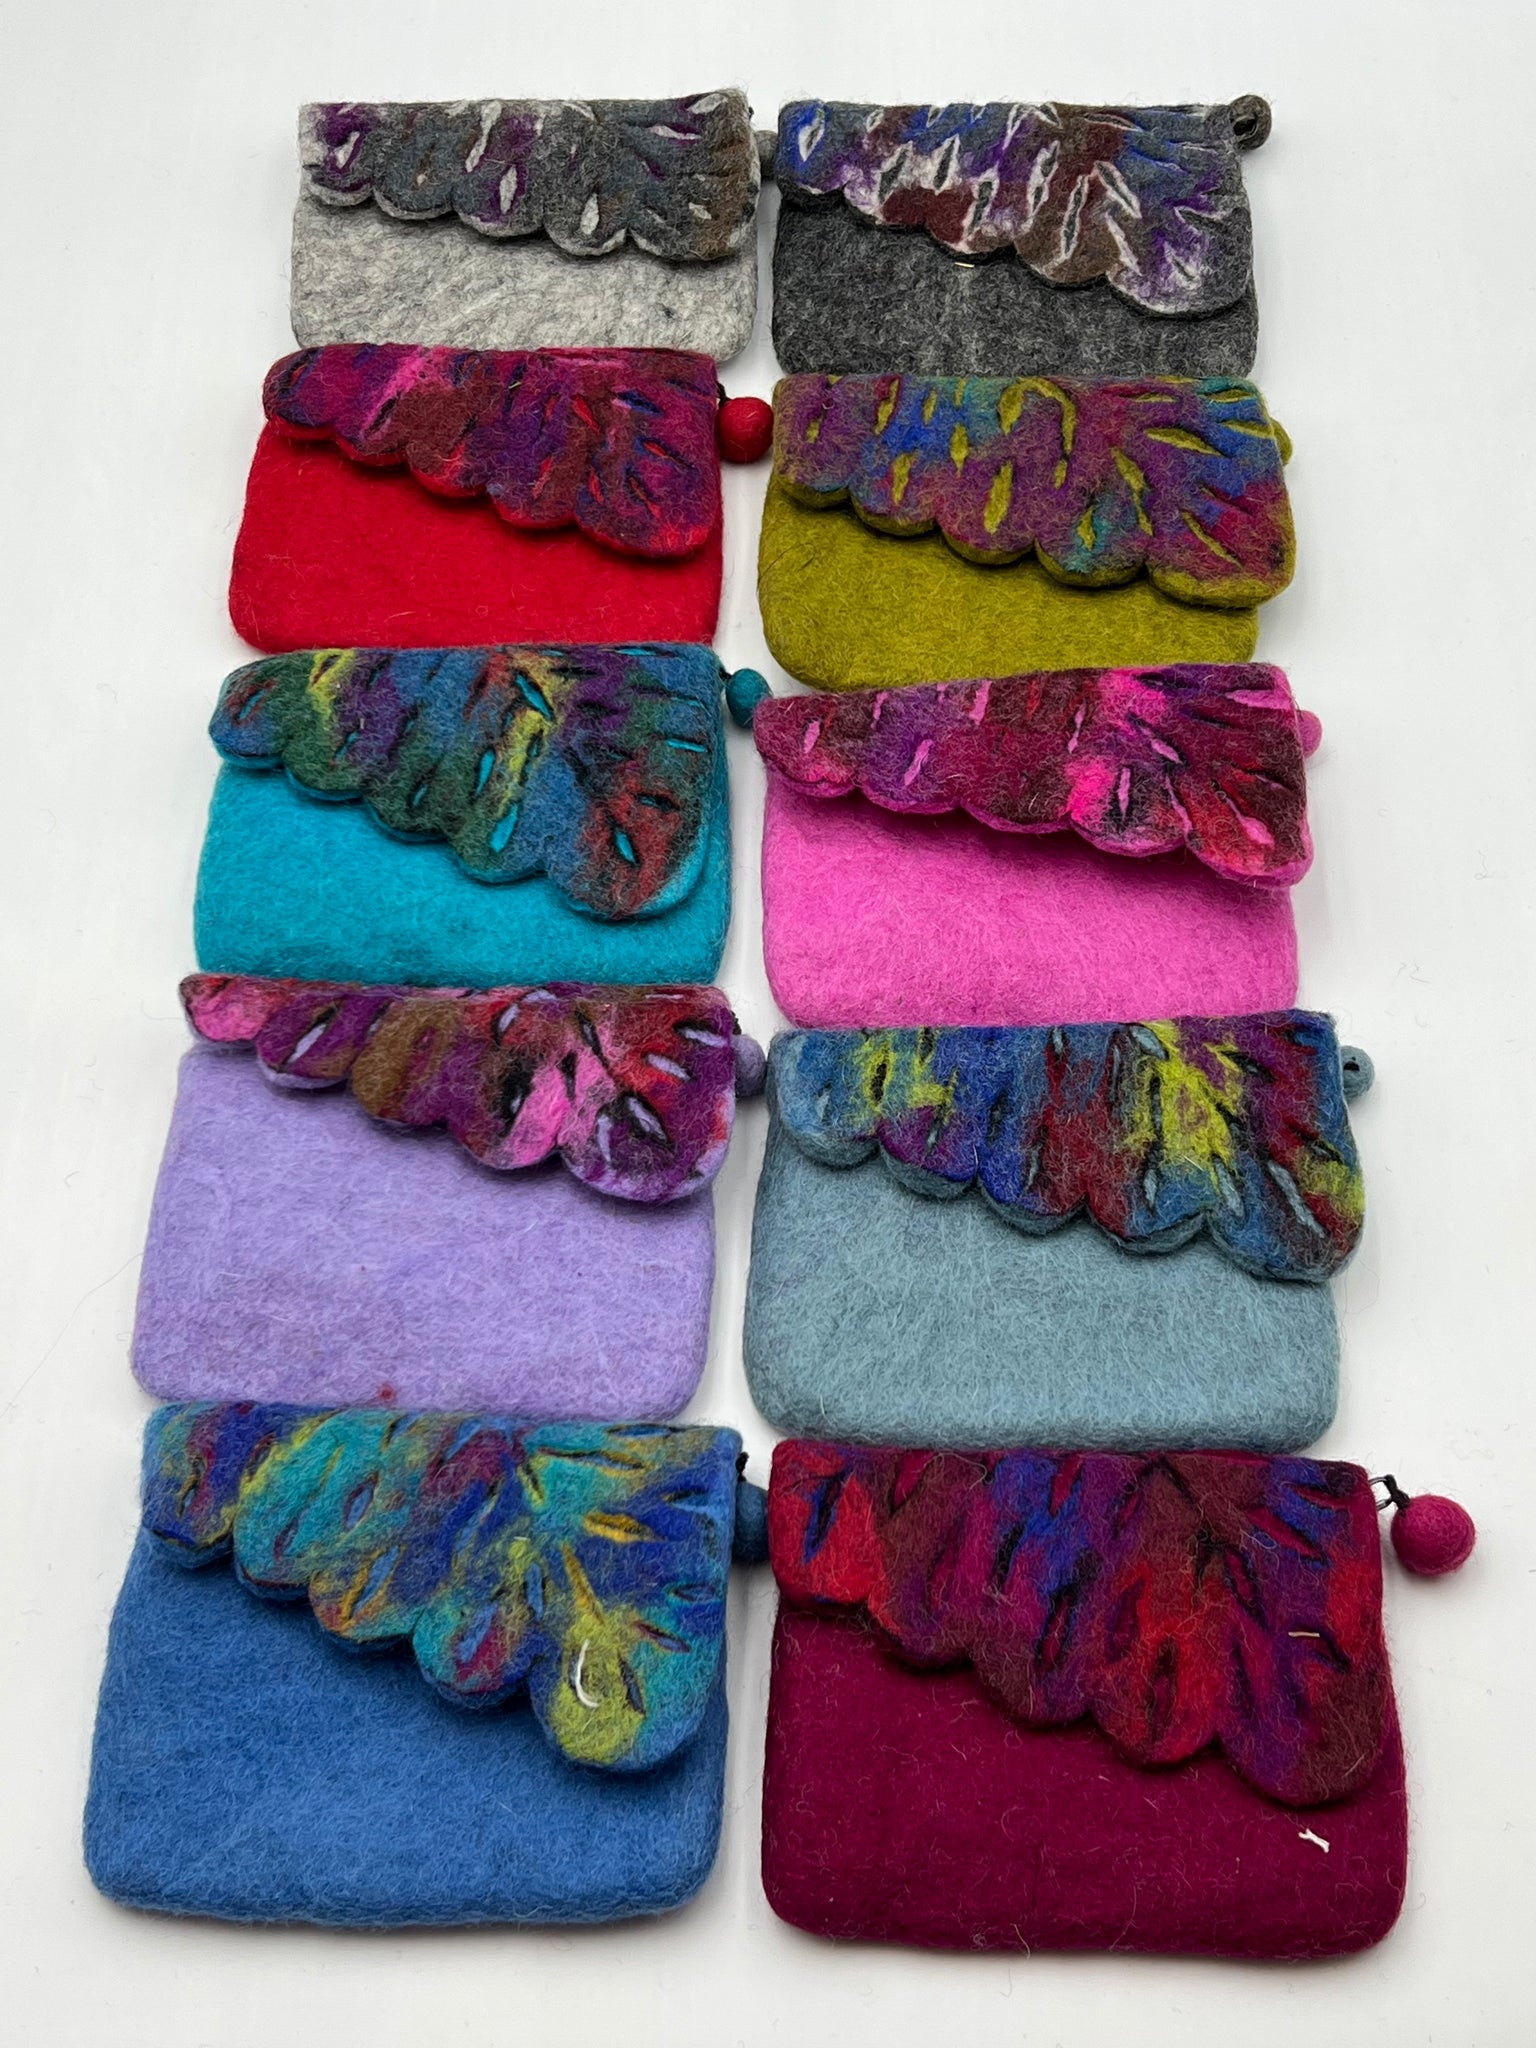 Felted Purse Pattern? | Knitting and Crochet Forum